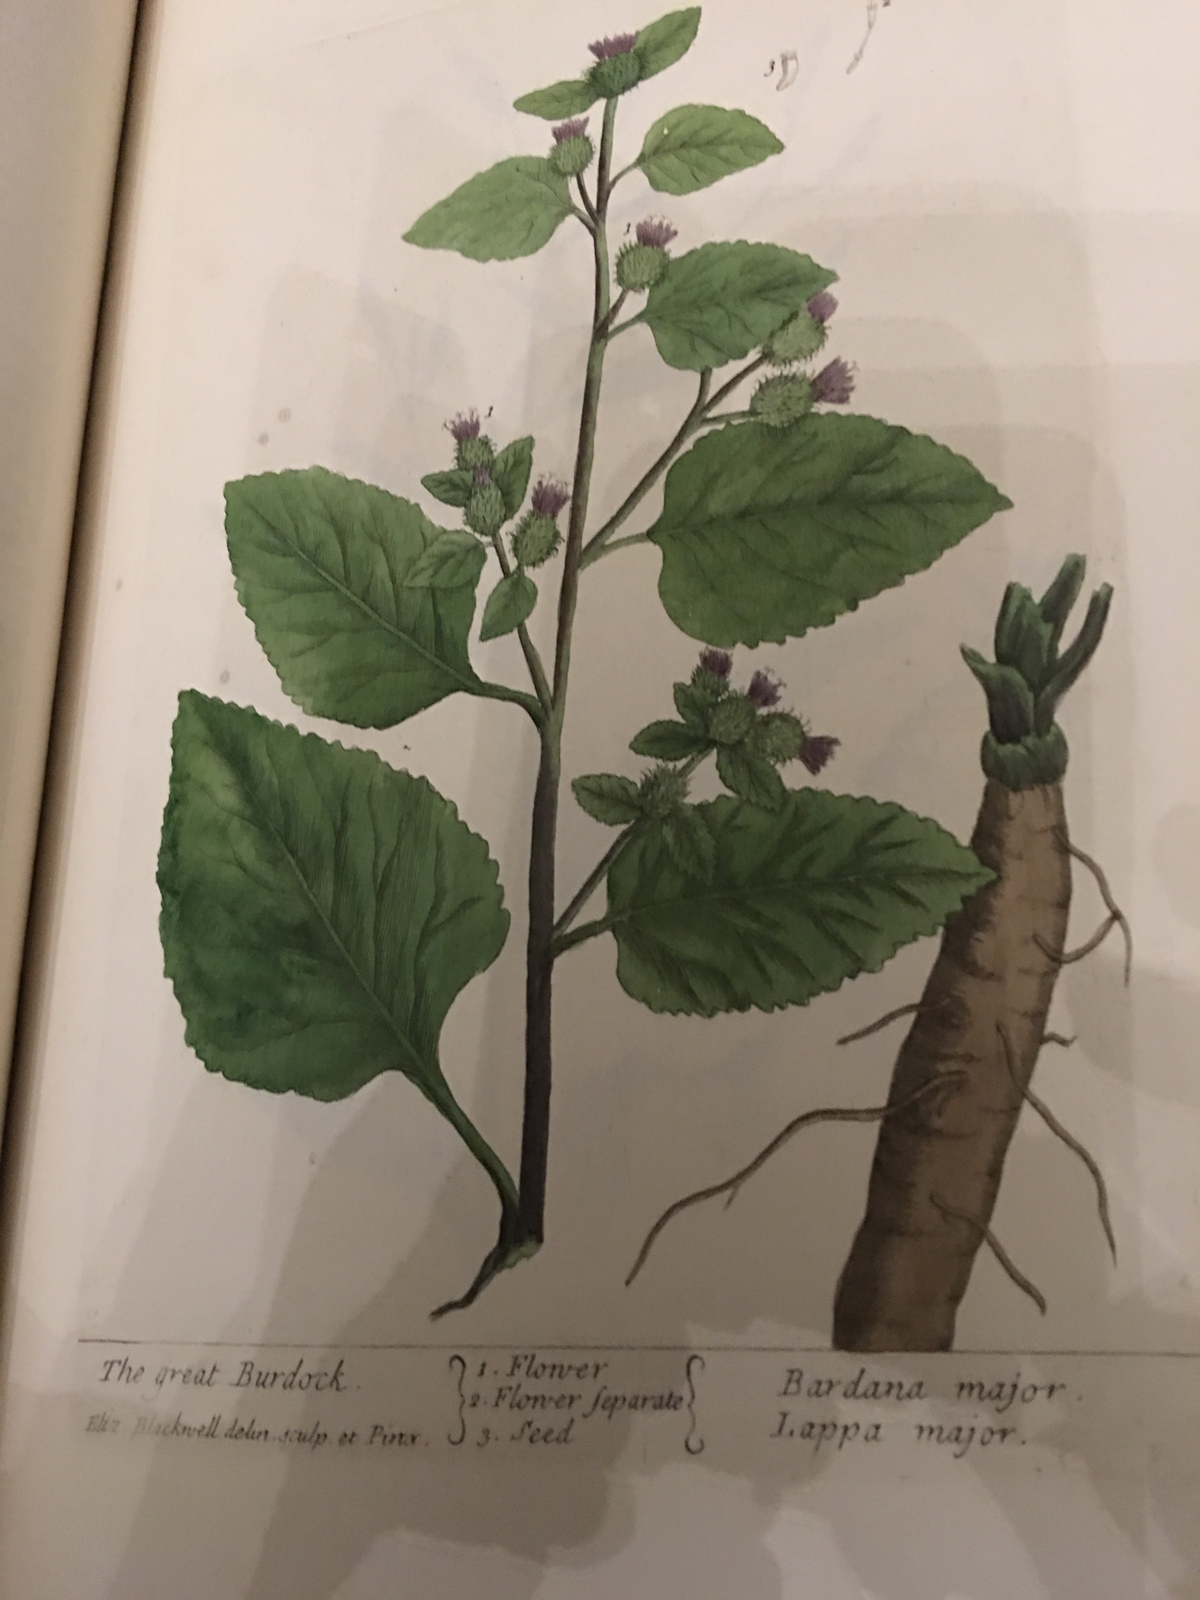 The Great Burdock from Elizabeth Blackwell's A curious herbal